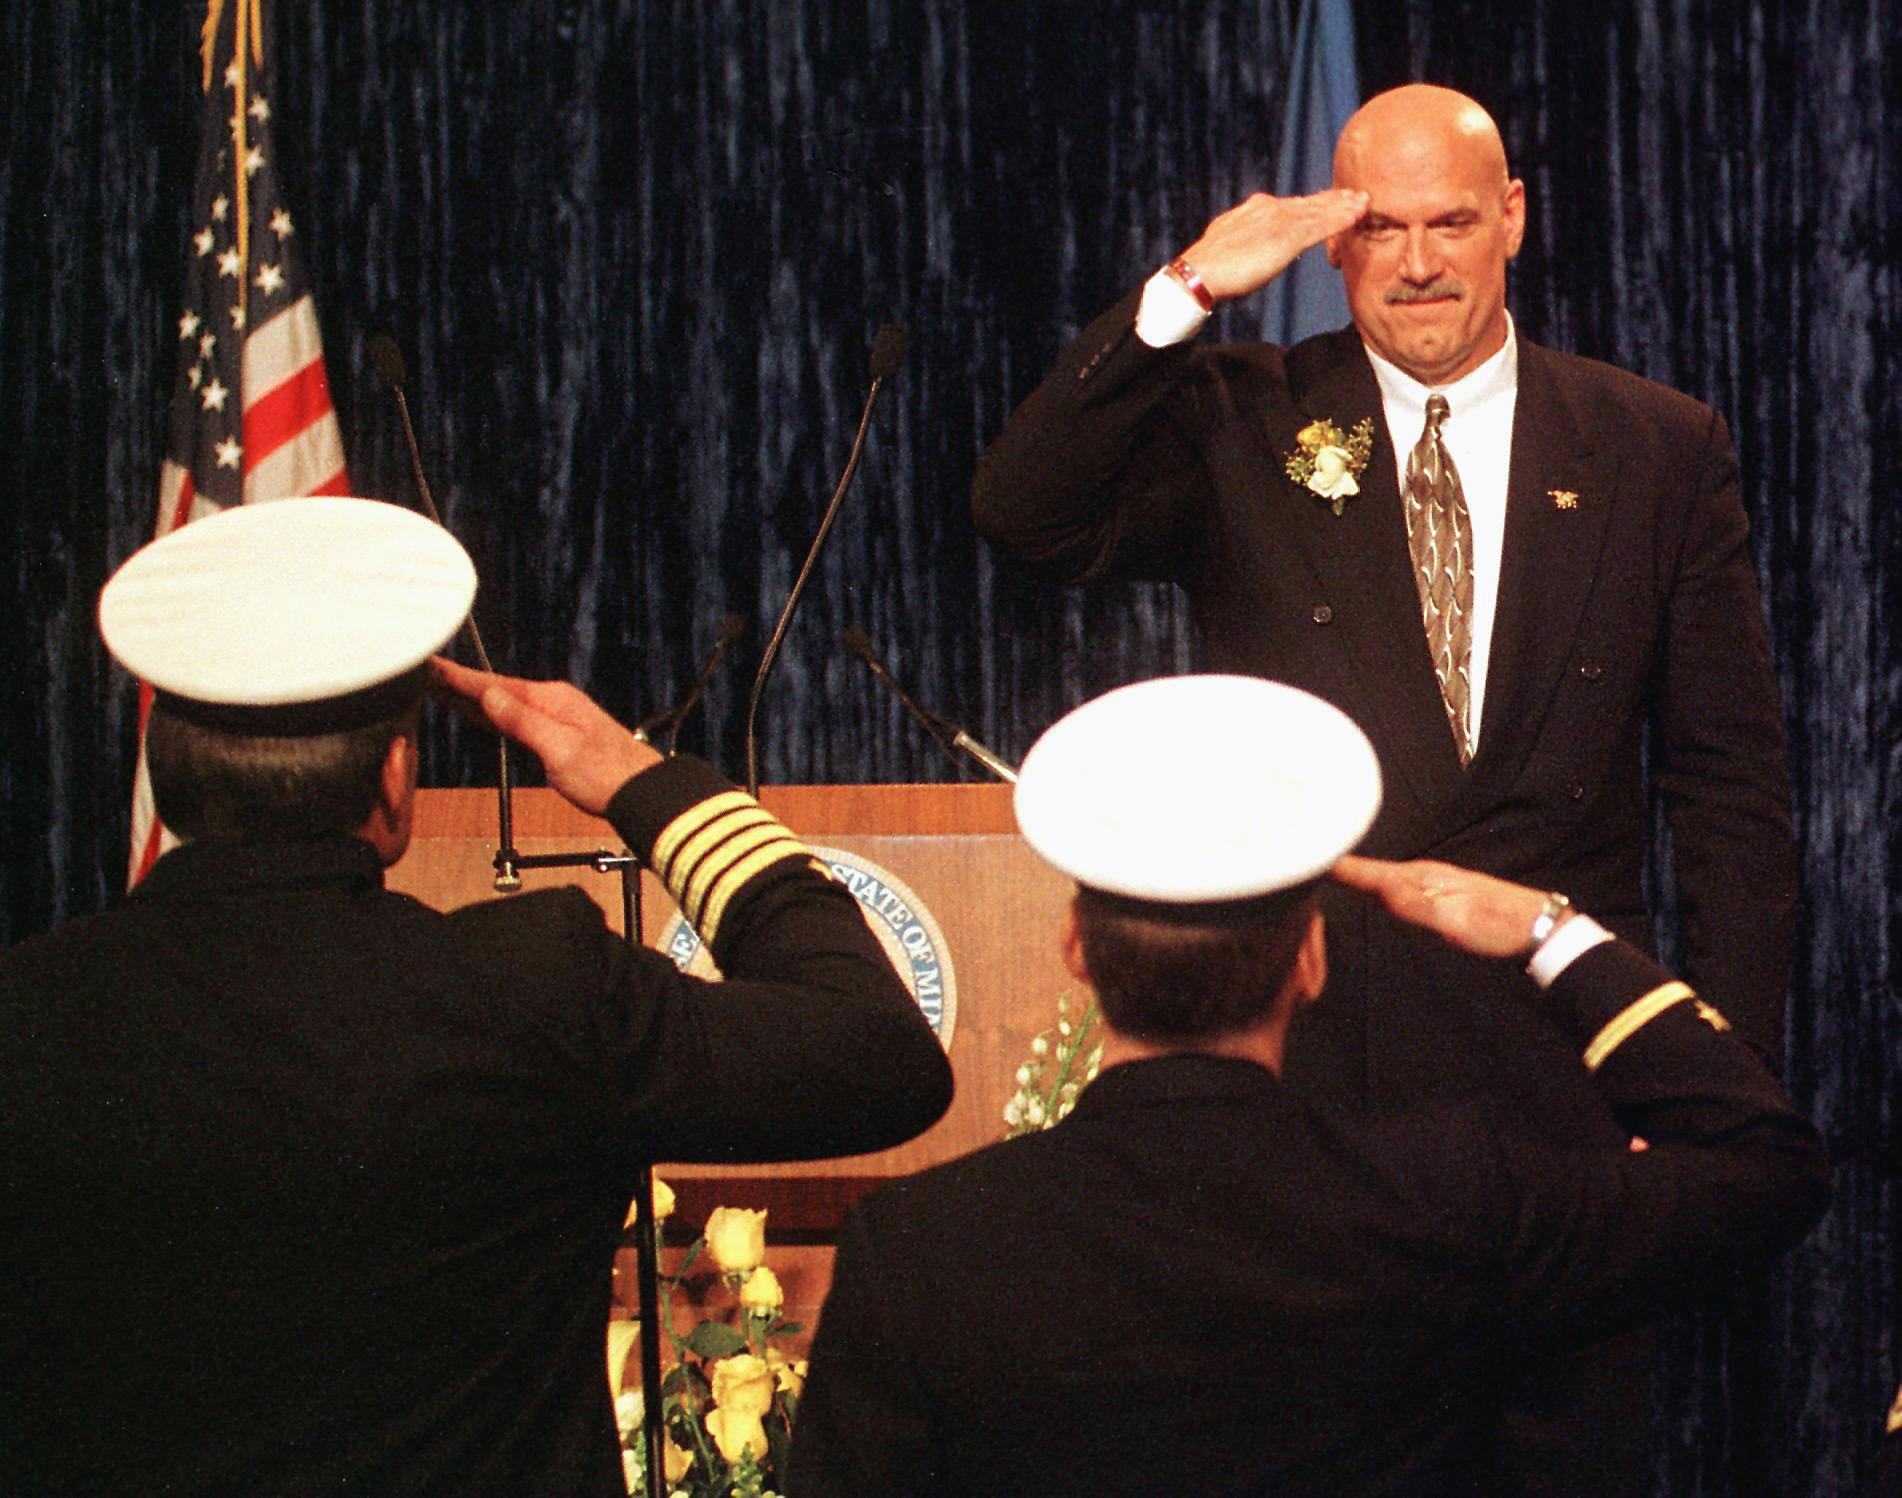 PHOTO: Minn. Governor Jesse Ventura salutes Naval Officers he invited to his inaugural after taking the oath of office to become Minnesota's 38th governor at the State Capitol in St. Paul, Minn., Jan. 4, 1999.